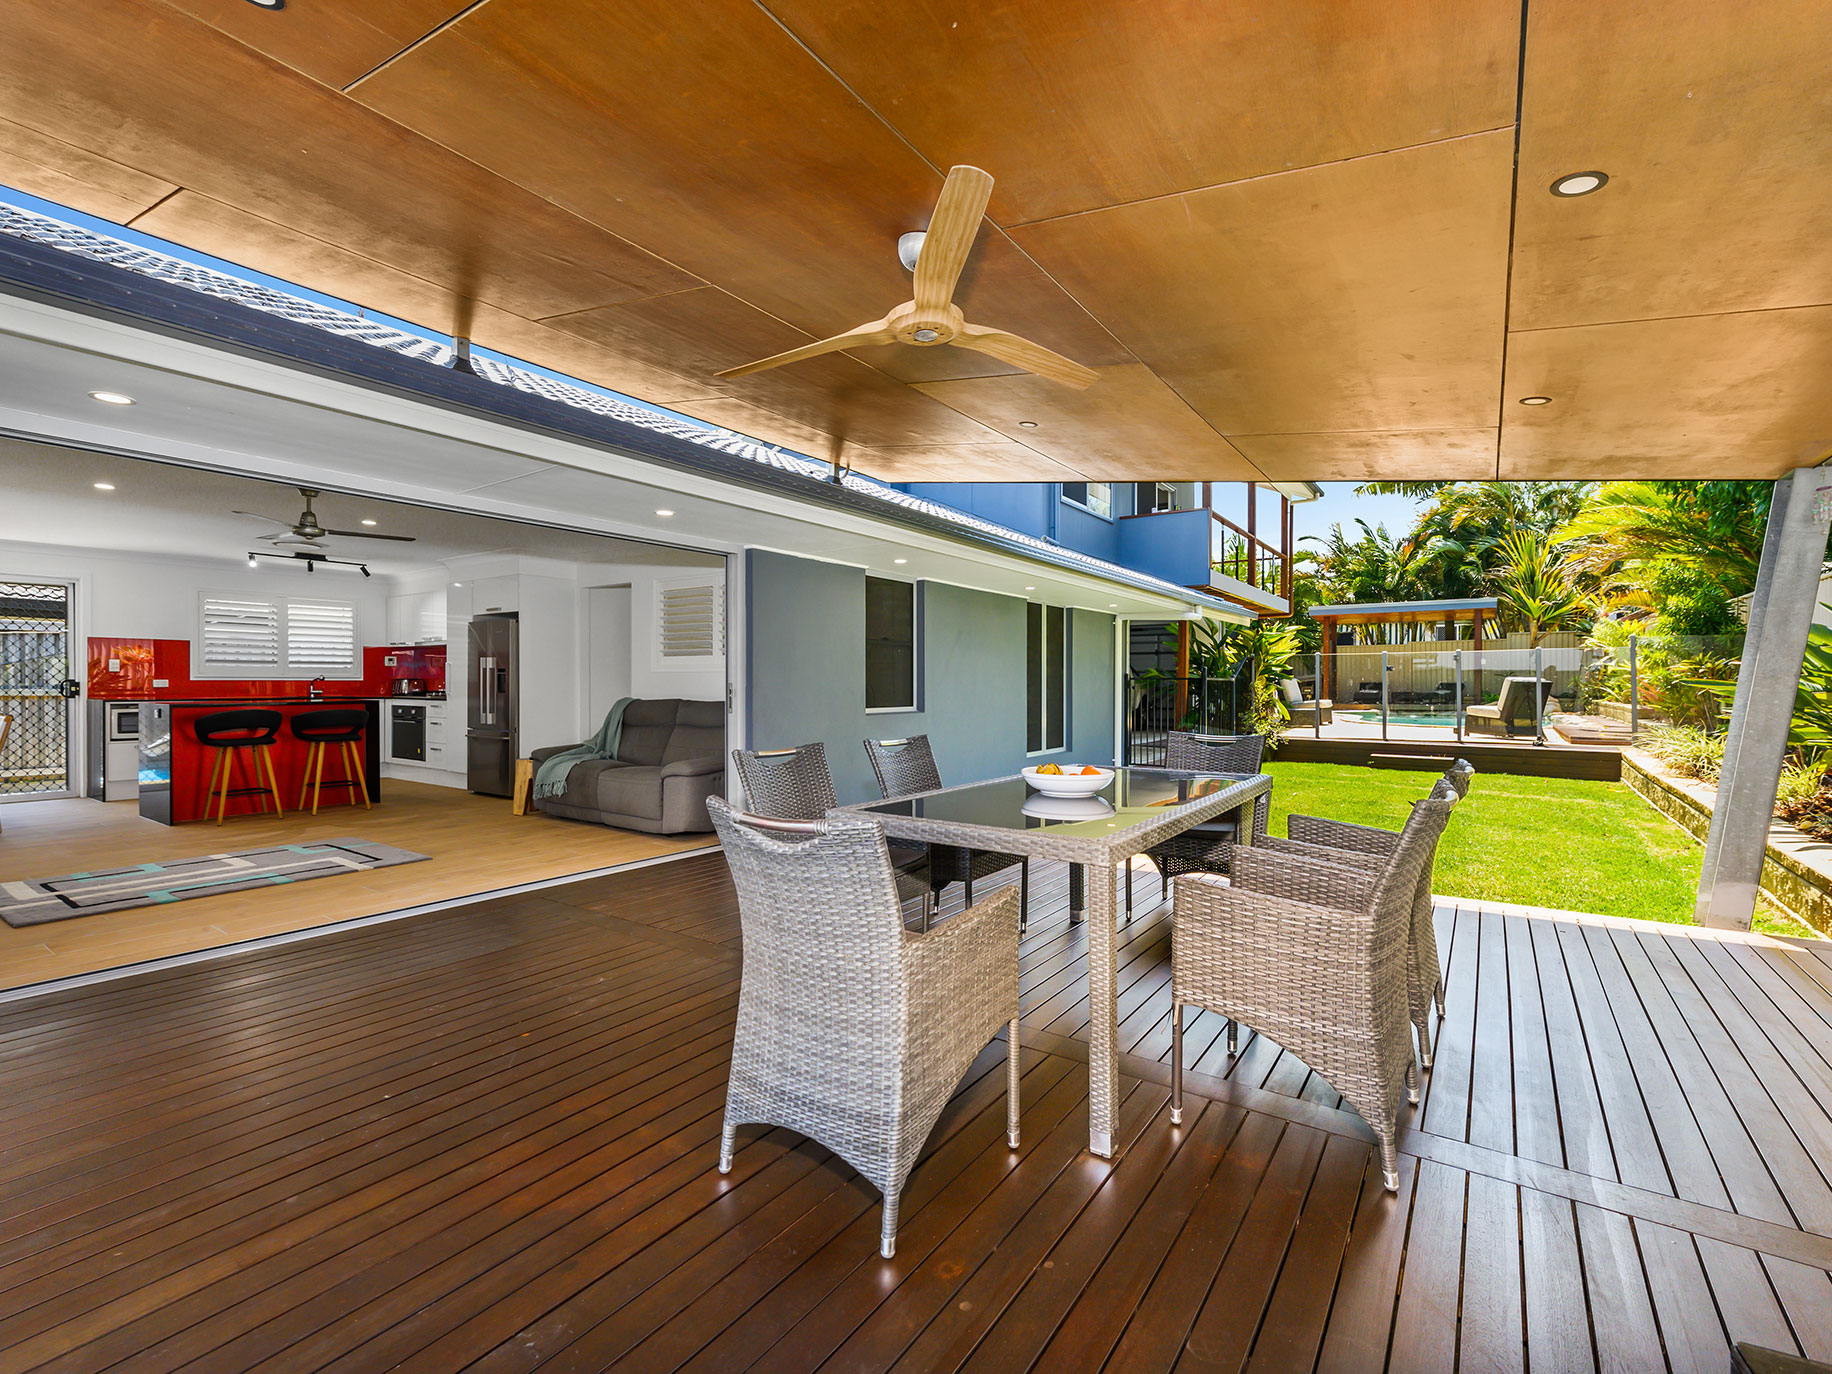 The kitchen's expansive open-plan dining area boasts a huge 6-meter concertina door that opens the room to reveal a raised outdoor dining deck with a 50s-inspired slanted roof.